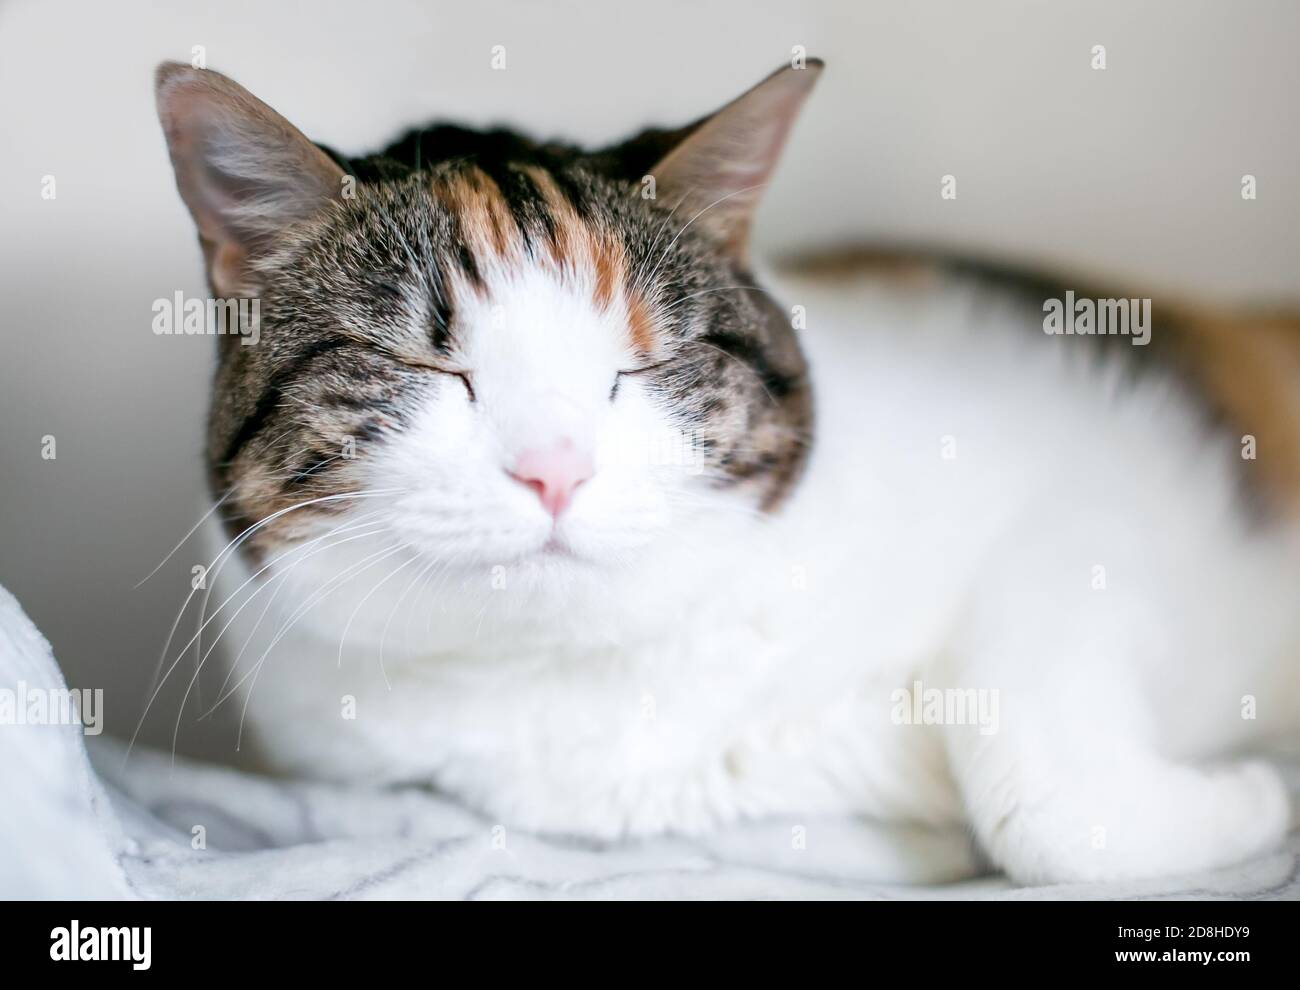 A sleepy calico tabby domestic shorthair cat lying down on a blanket with its eyes closed Stock Photo